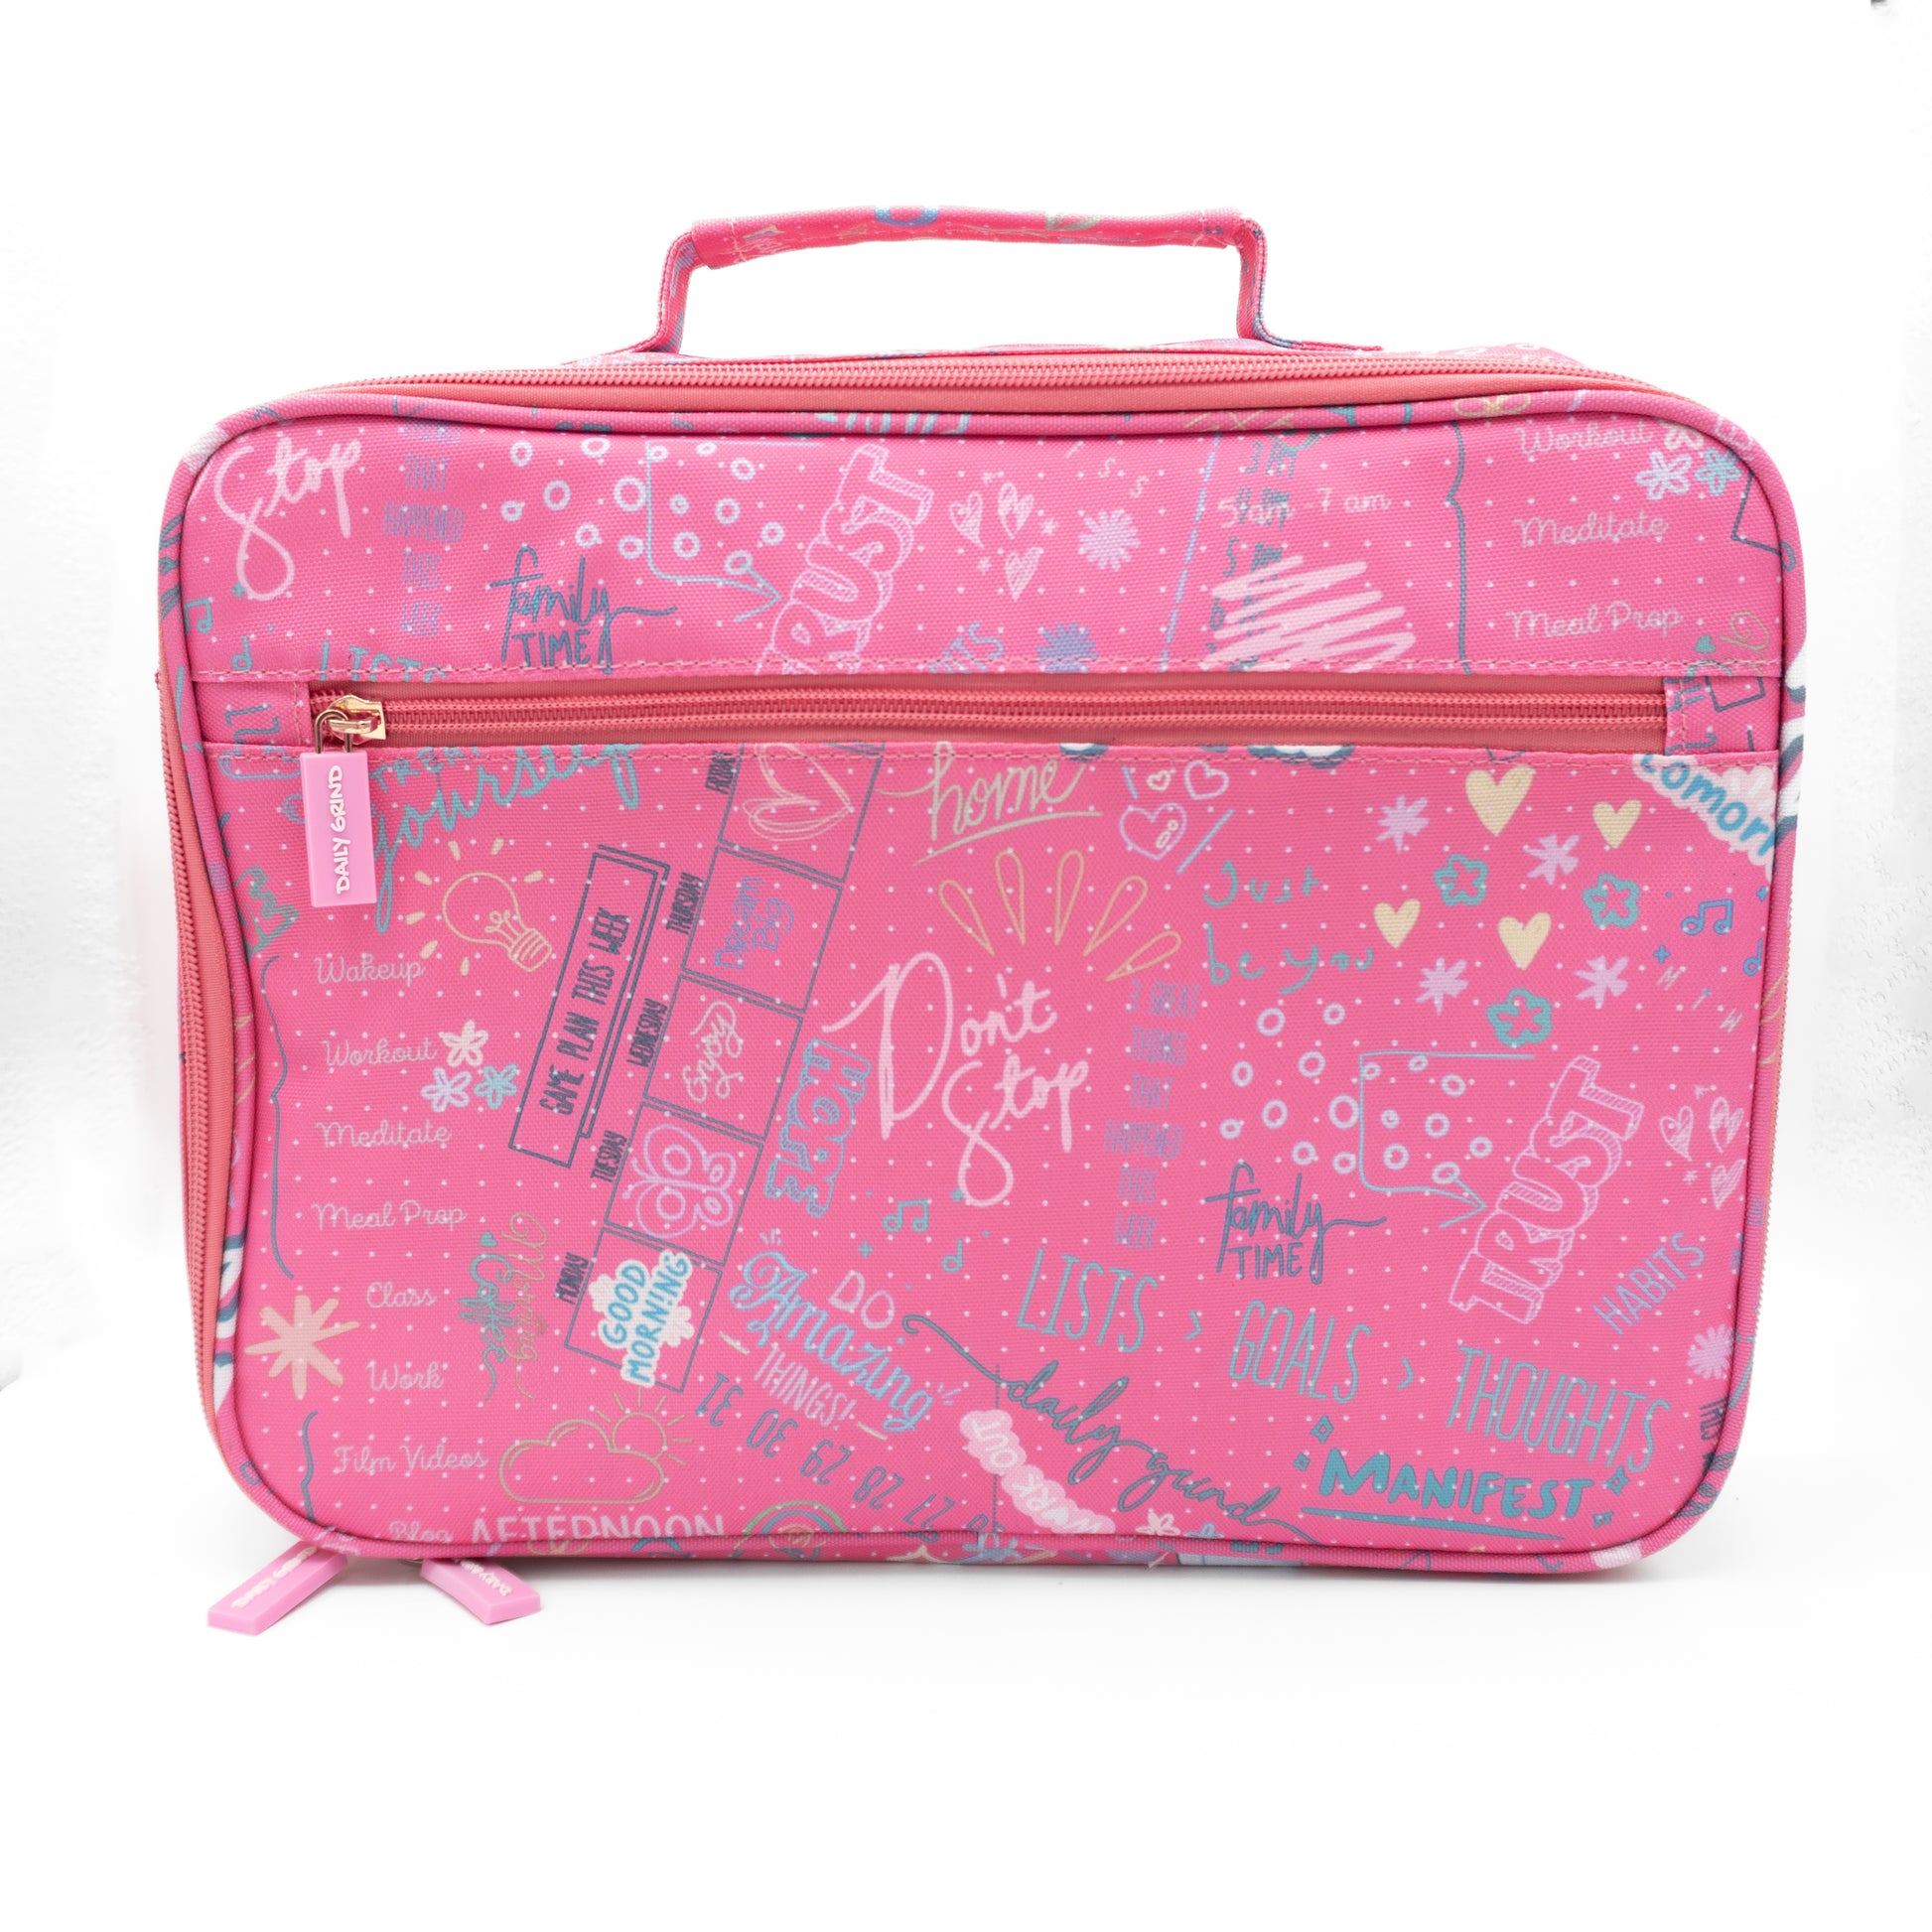 Front of pink travel planner case